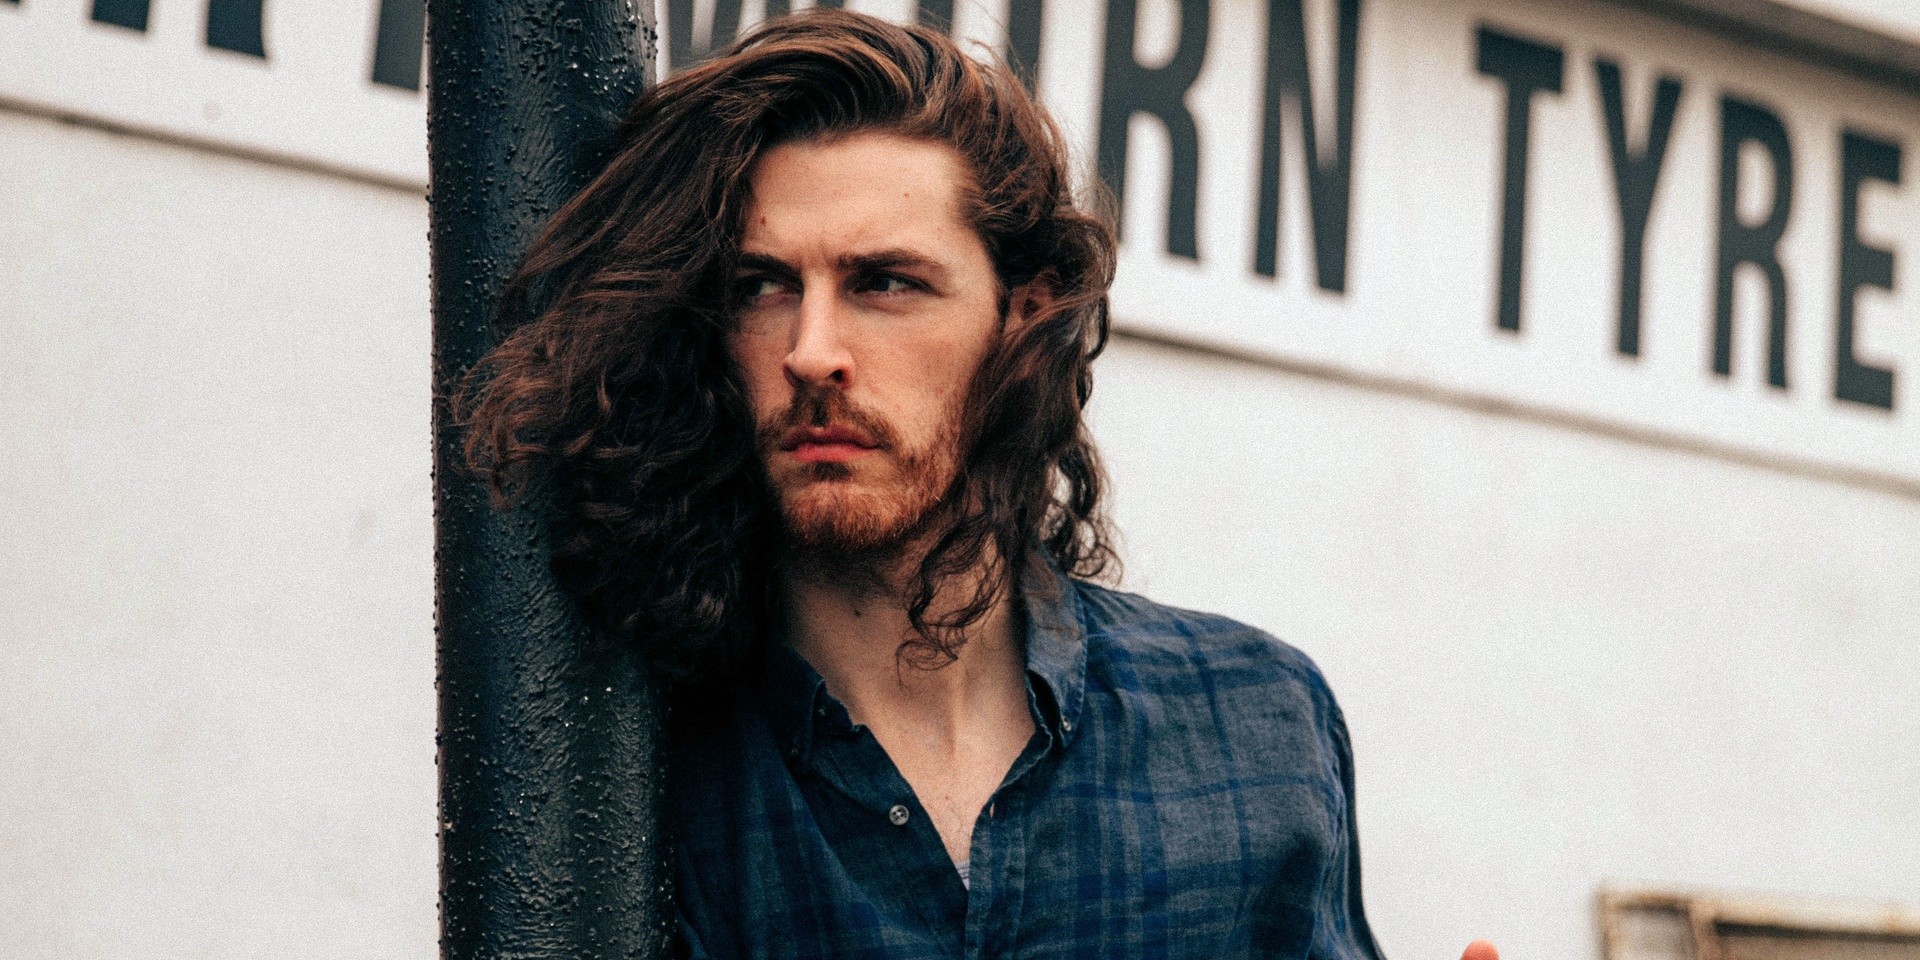 Hozier announces first album in 5 years, releases new single 'Almost'